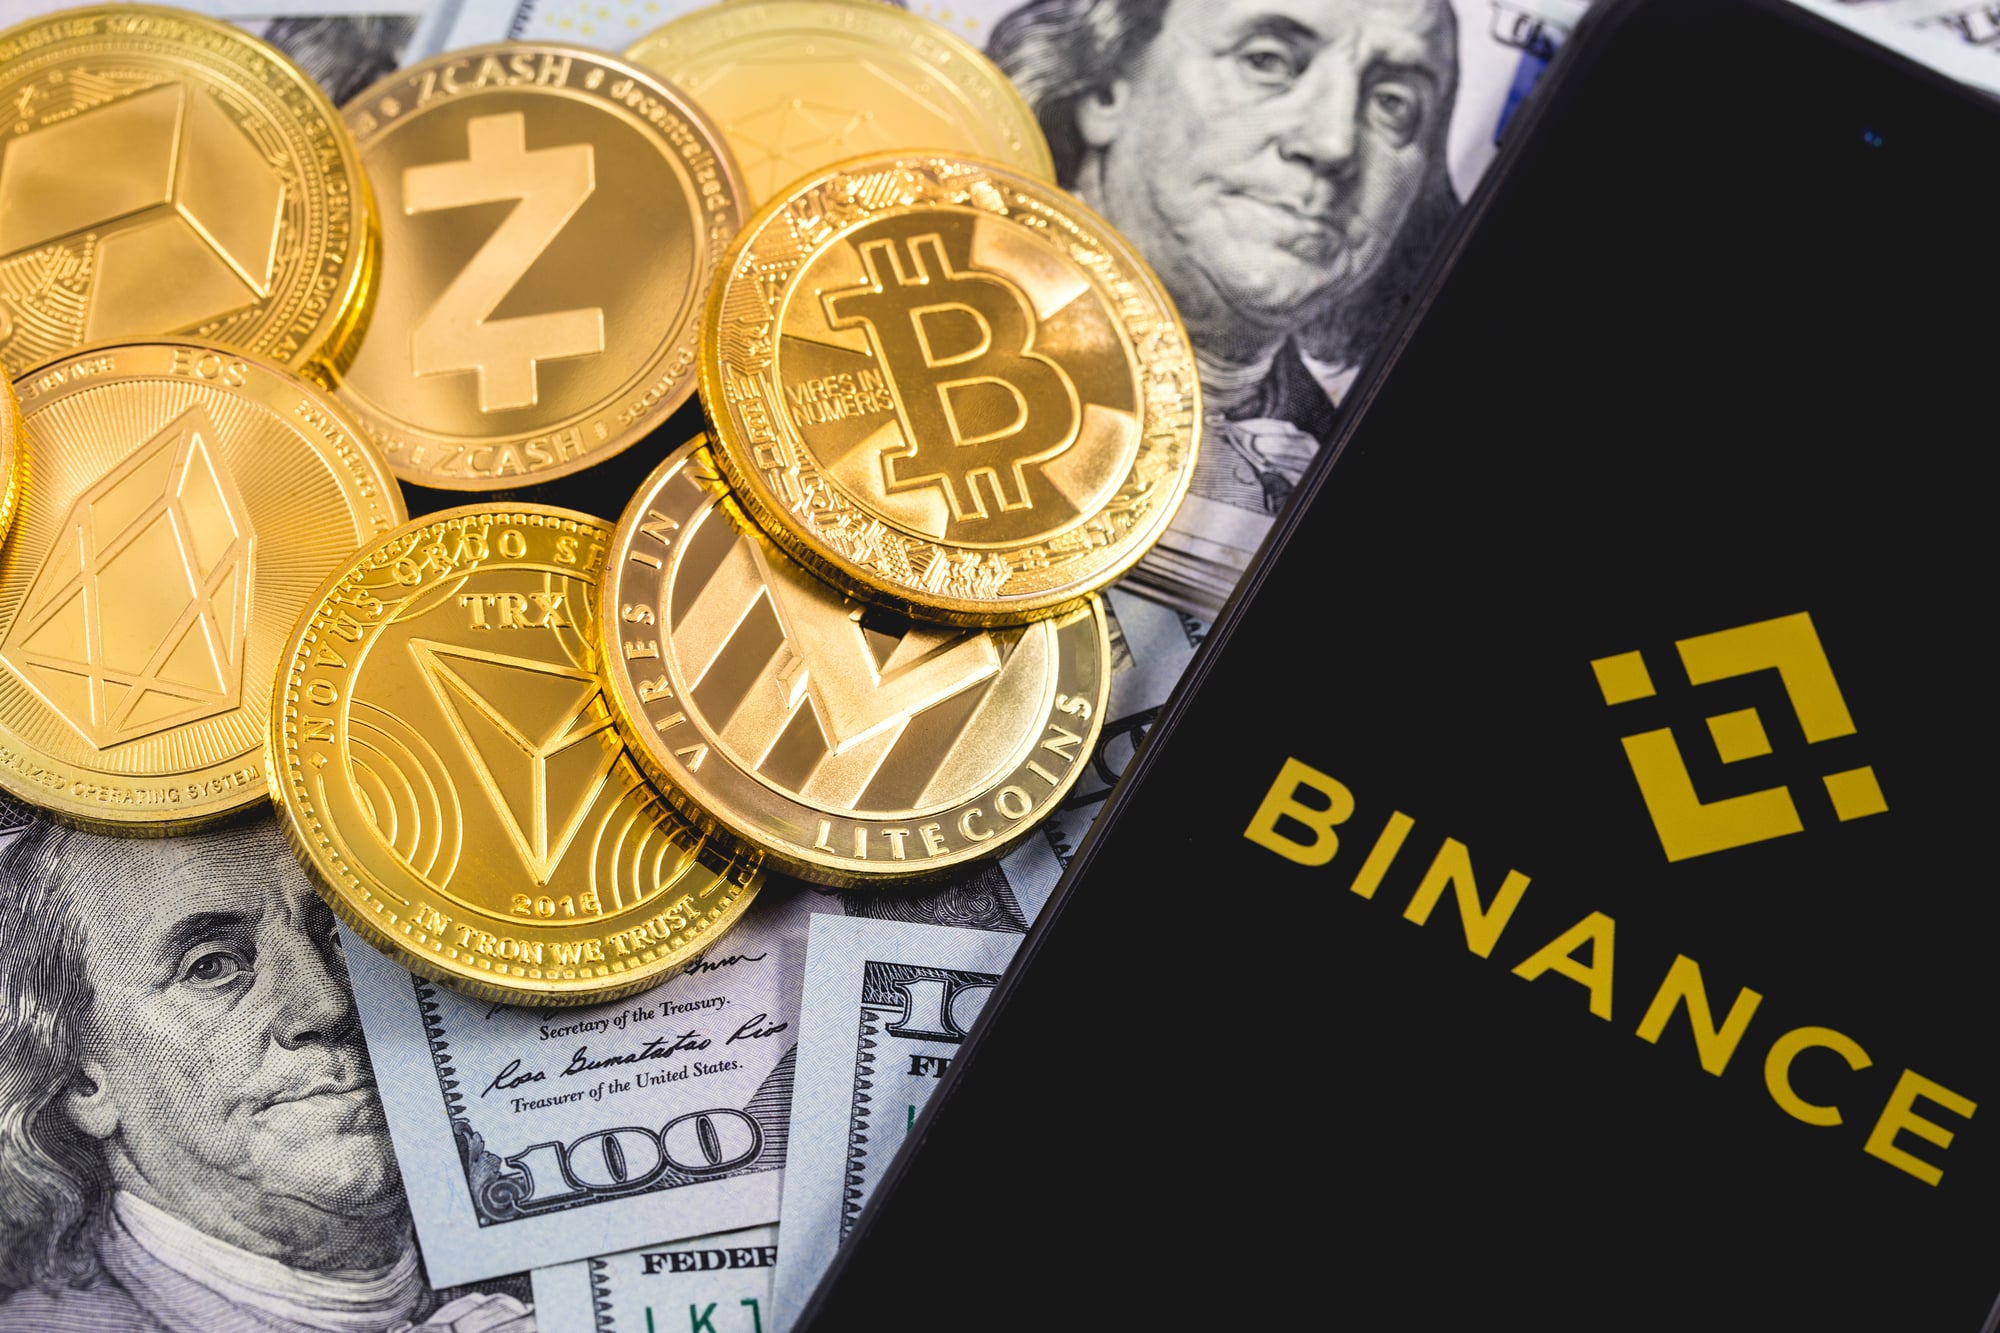 Crypto investors claim multimillion damages from Binance after a major outage in May